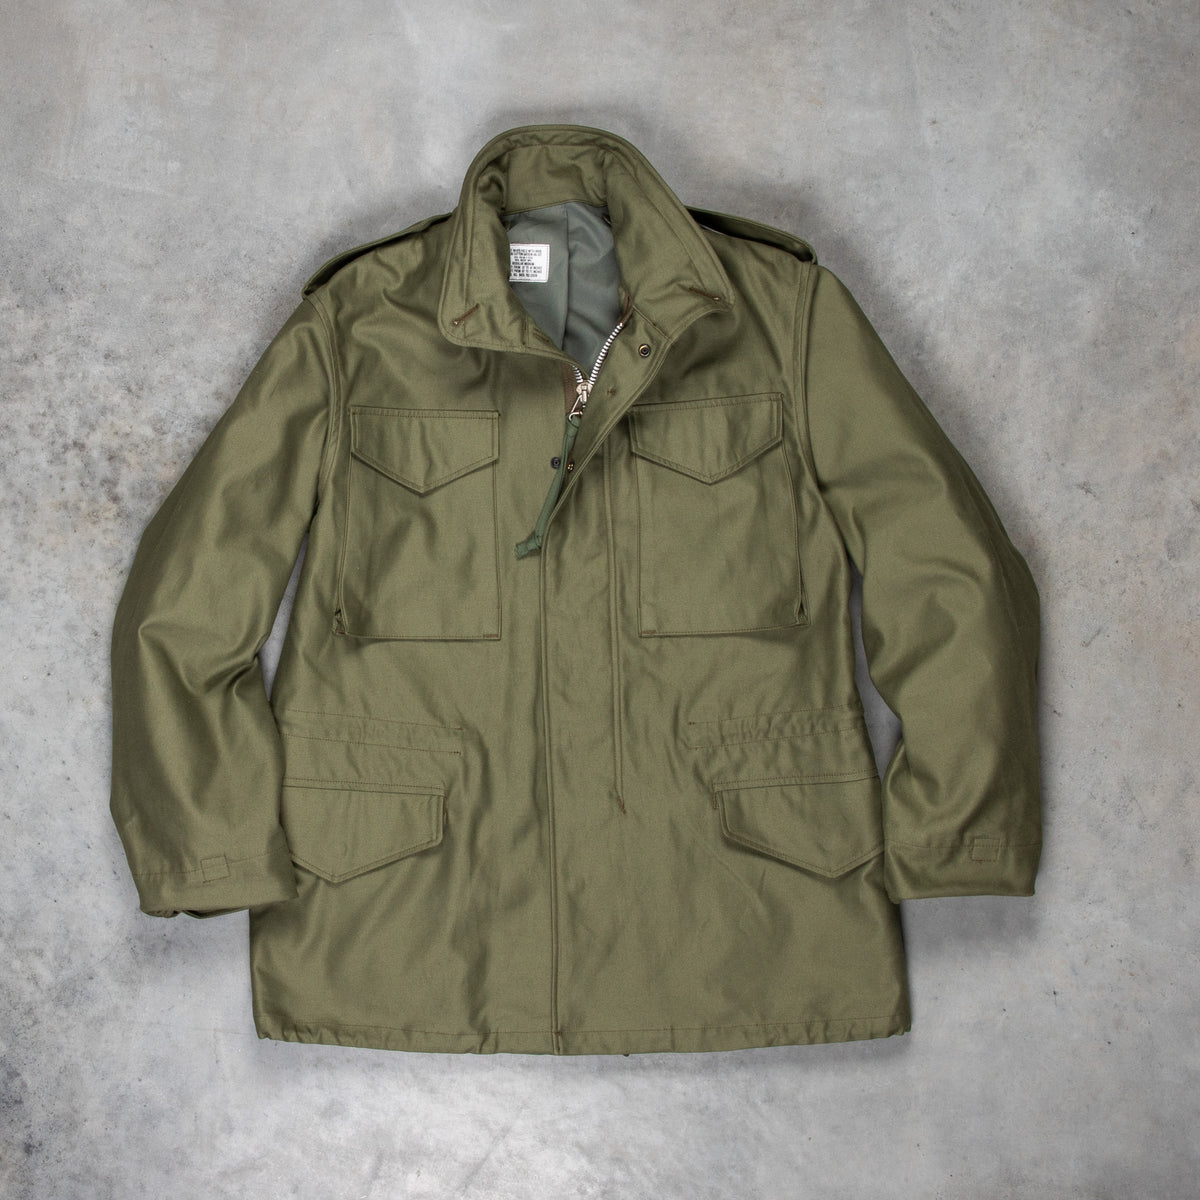 The Real McCoy's Man's M-65 Field Coat – Frans Boone Store